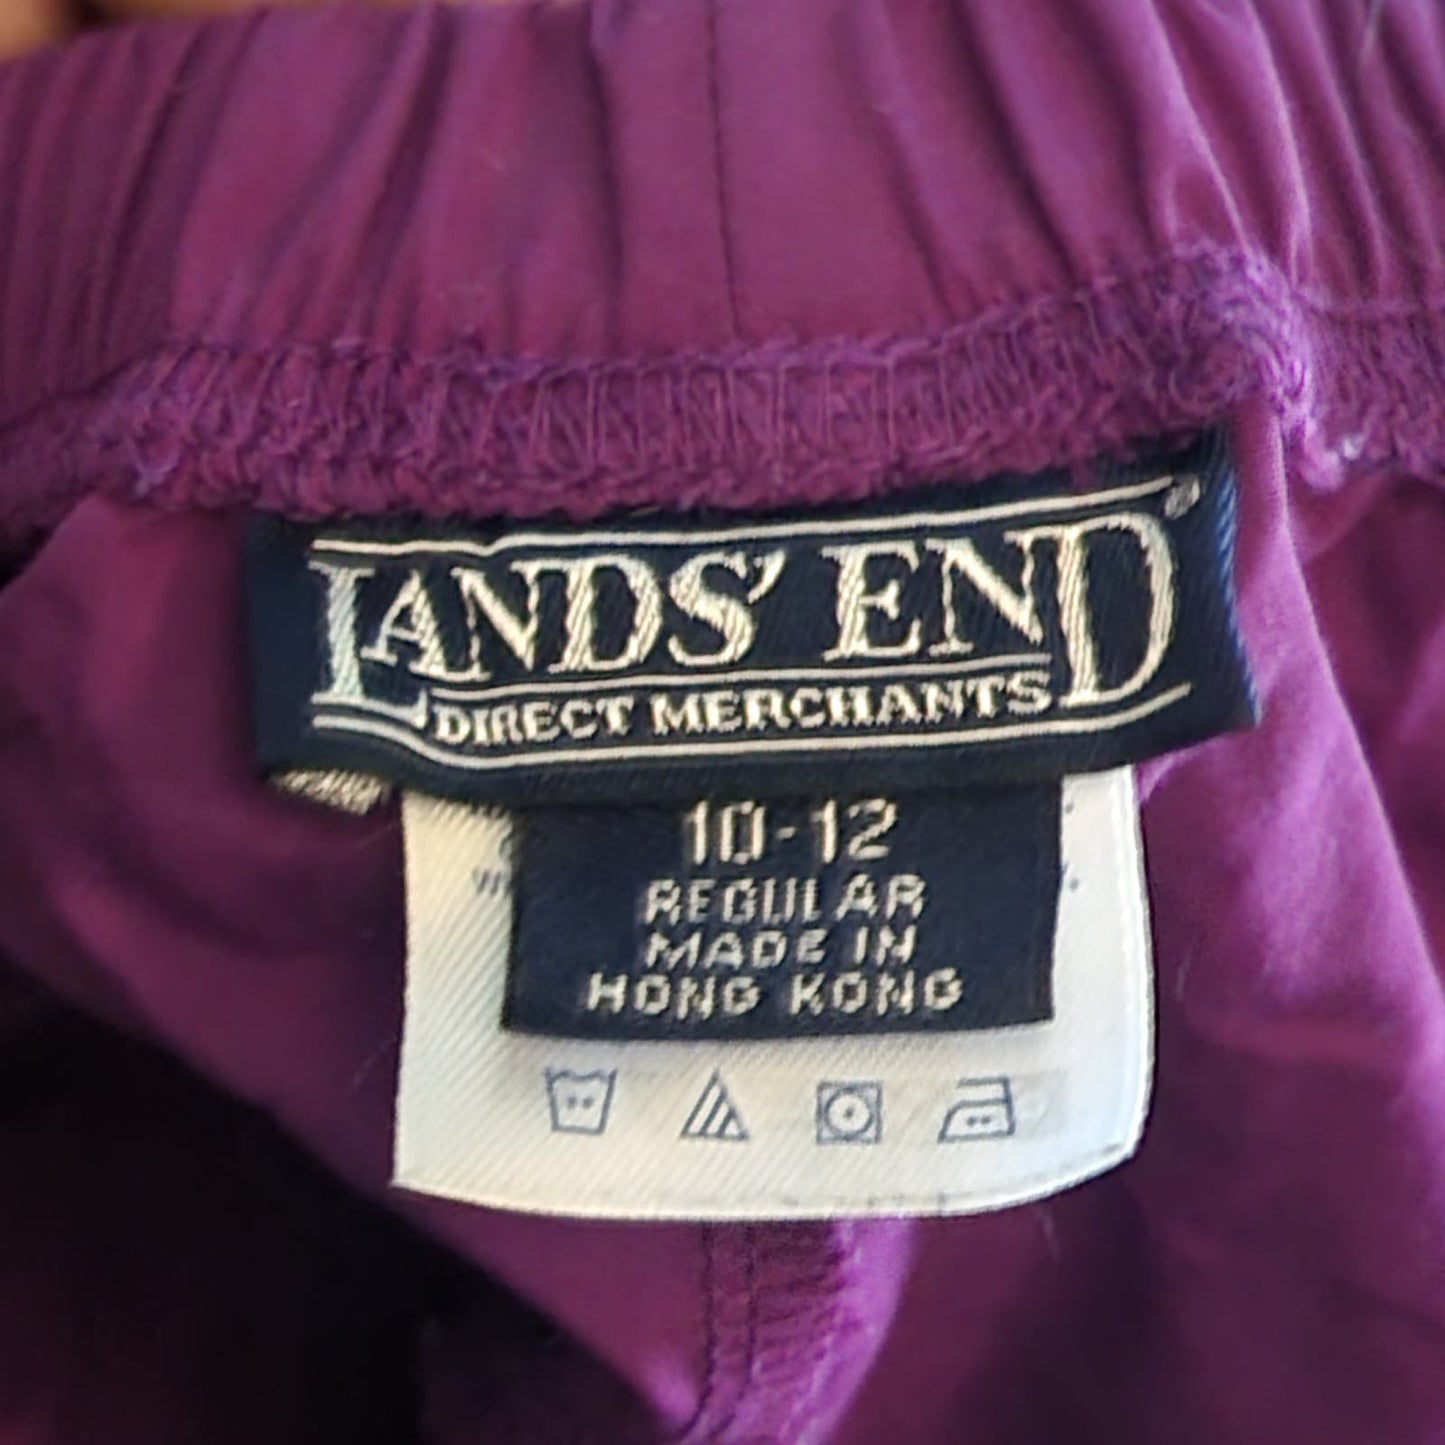 Vintage 90s High Rise Mom Running Shorts